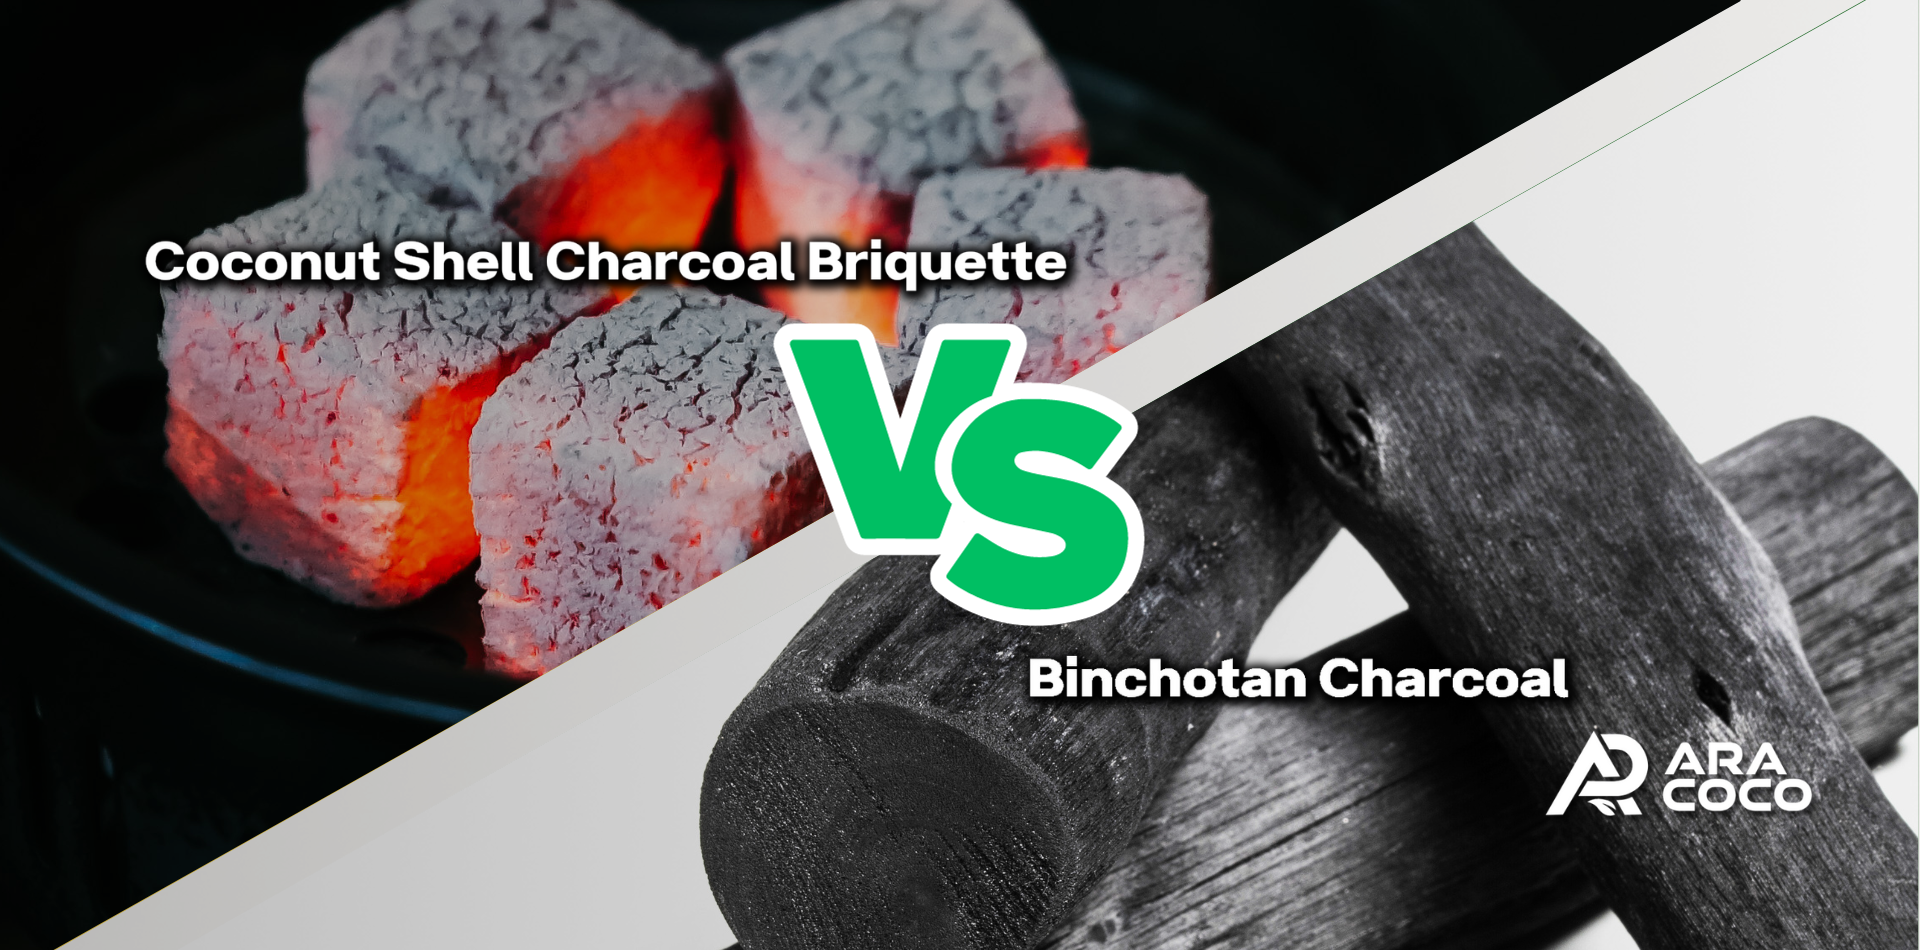 Coconut Shell Charcoal Briquette vs. Binchotan Charcoal: Choosing the Right Type for Your Needs